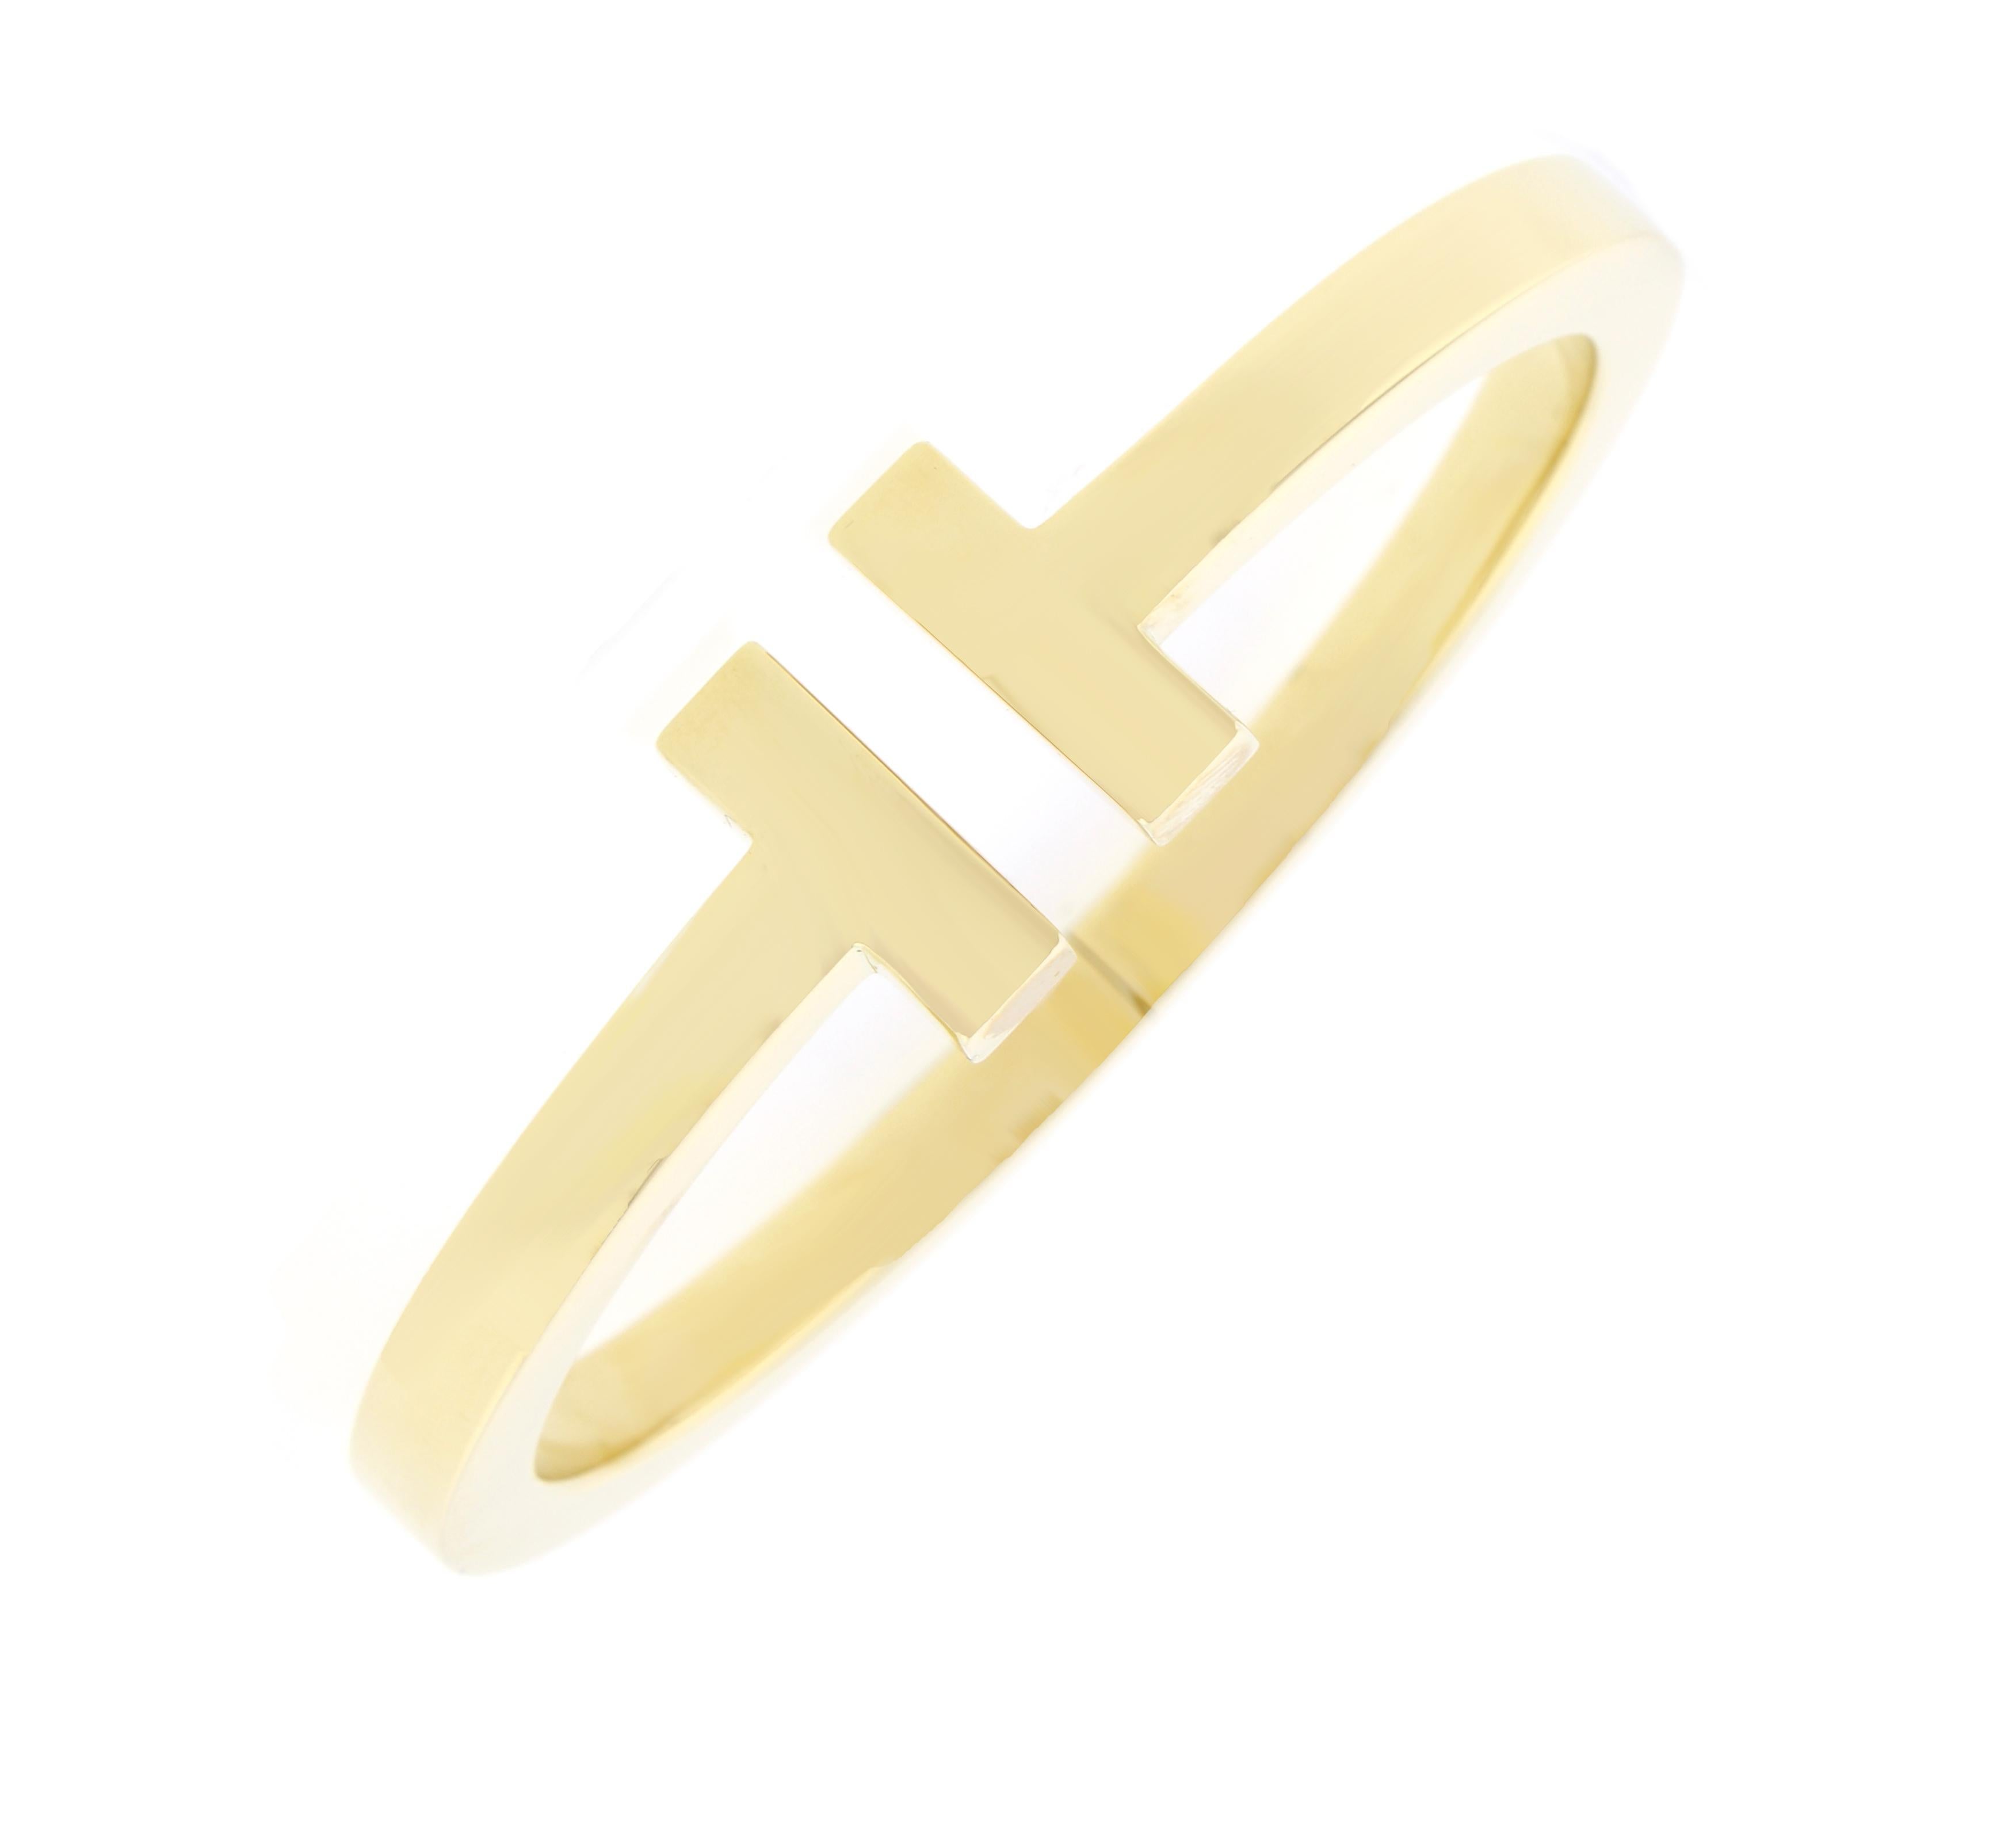 From Tiffany & Co. thier Tiffany Square T bangle bracelet. With graphic angles and clean lines the Tiffany T bracelet is sleek and sophistication.

18 karat gold
Size medium
Fits wrists up to 6.25